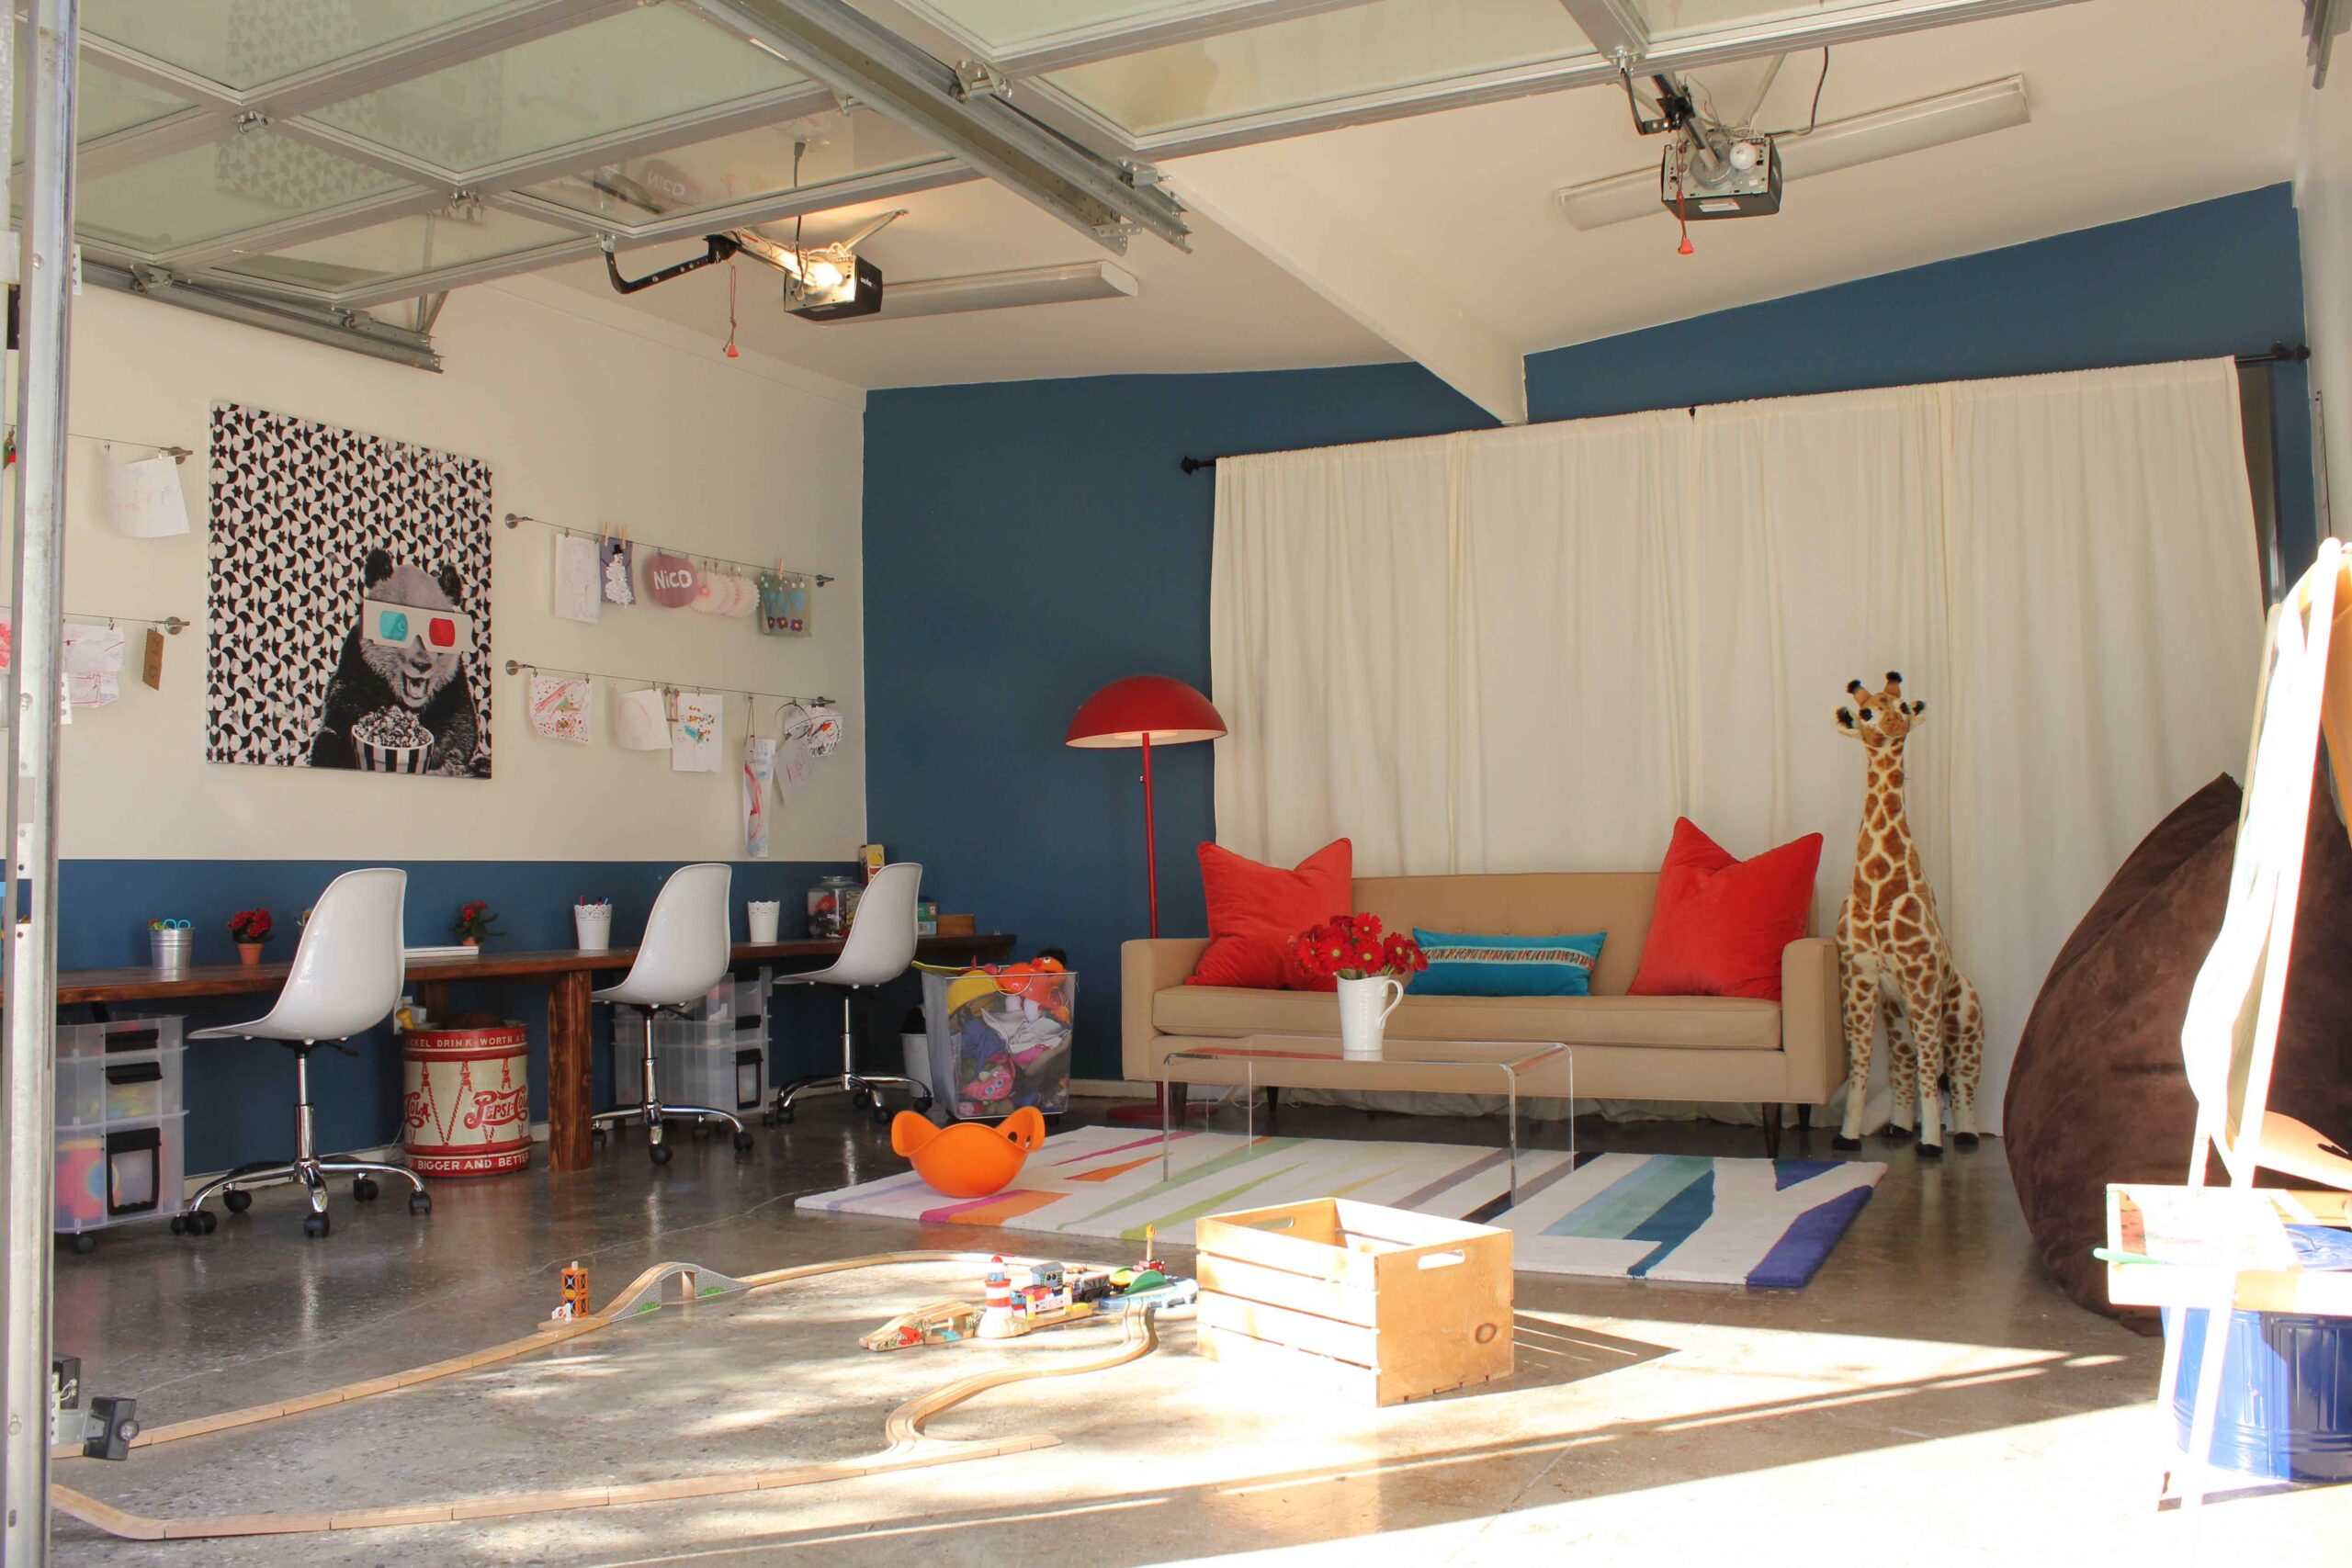 Garage converted into child's playroom space